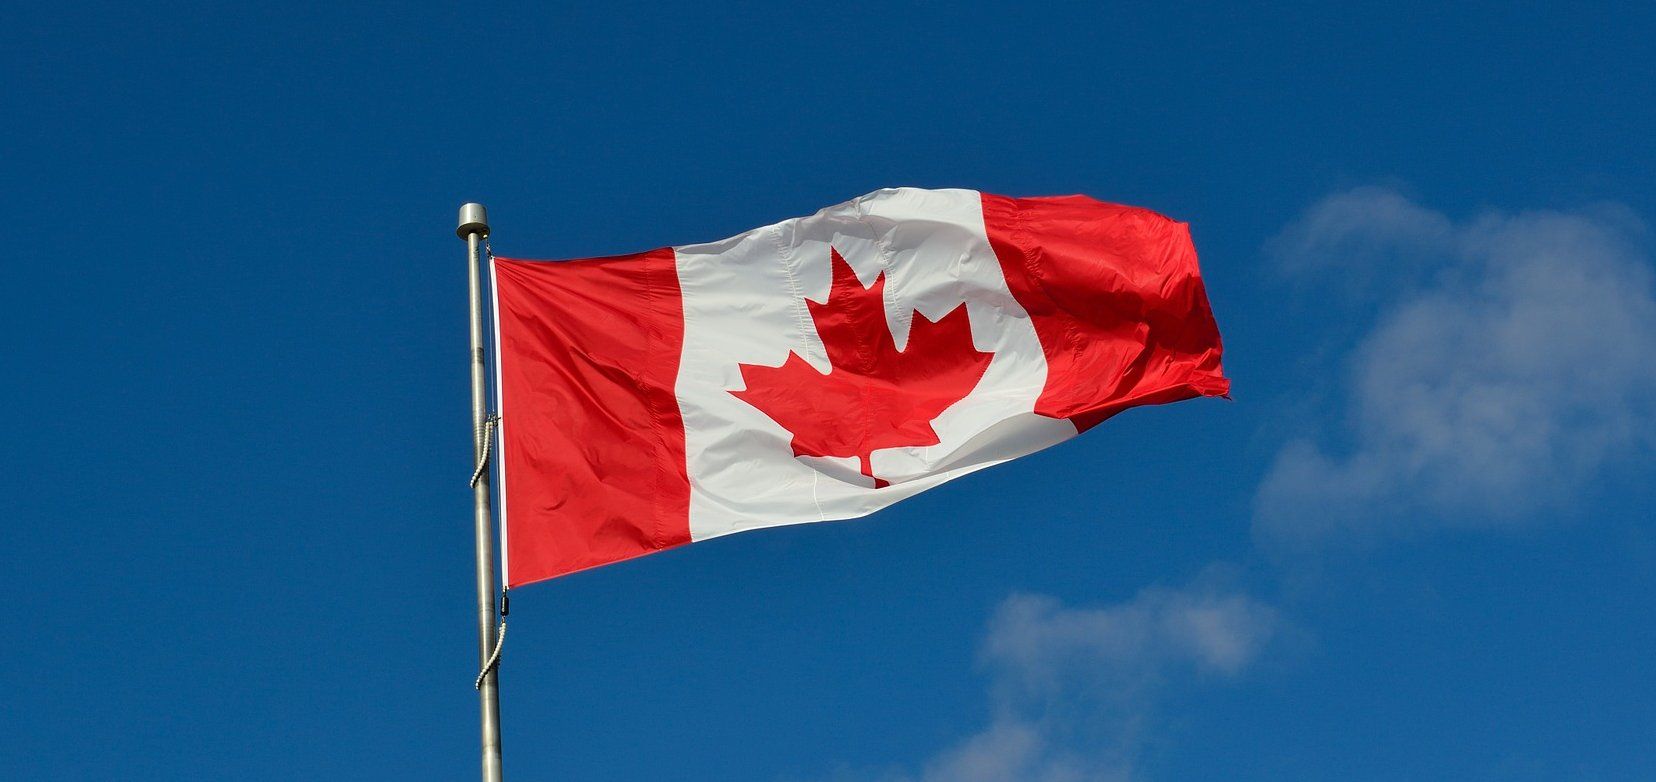 The Canadian flag waves in the breeze.